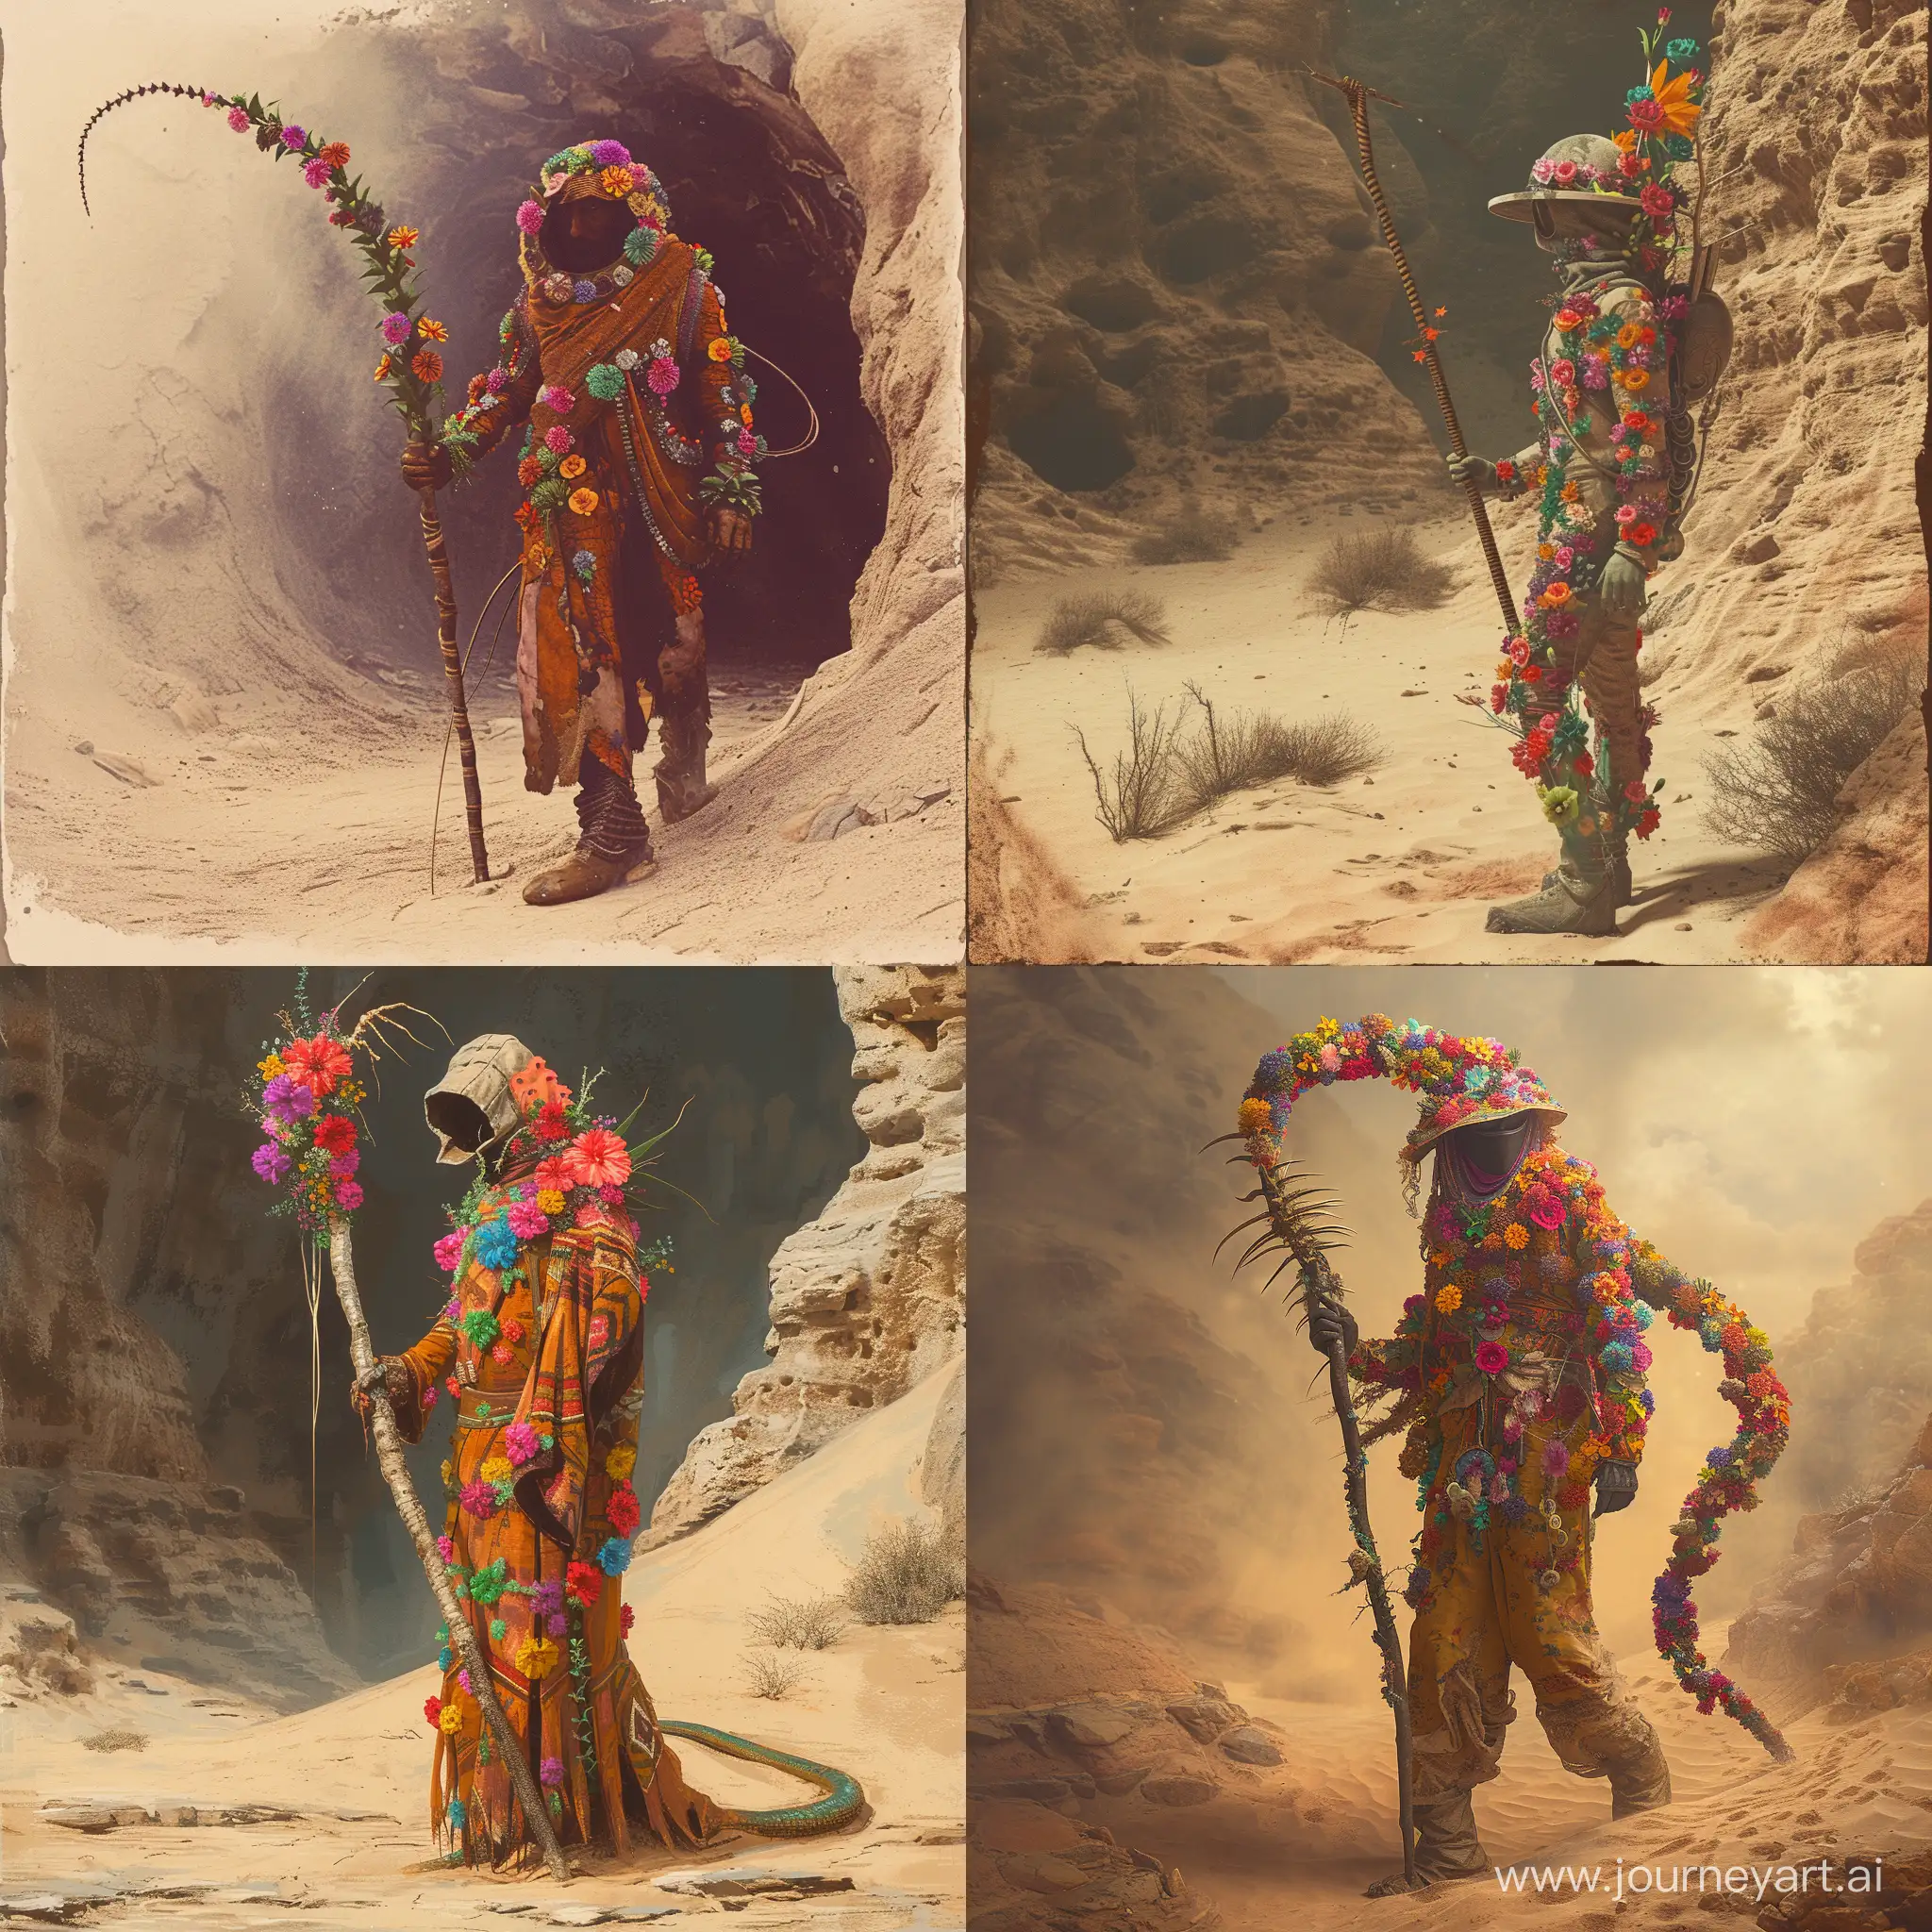 a dune Expert desert ecologist, Attire adorned with colorful desert flowers, Carries a staff made from a sandworm spine, Studies Arrakis' unique flora and fauna,  in a oasis ,1970's dark fantasy style, gritty, dark, vintage, detailed